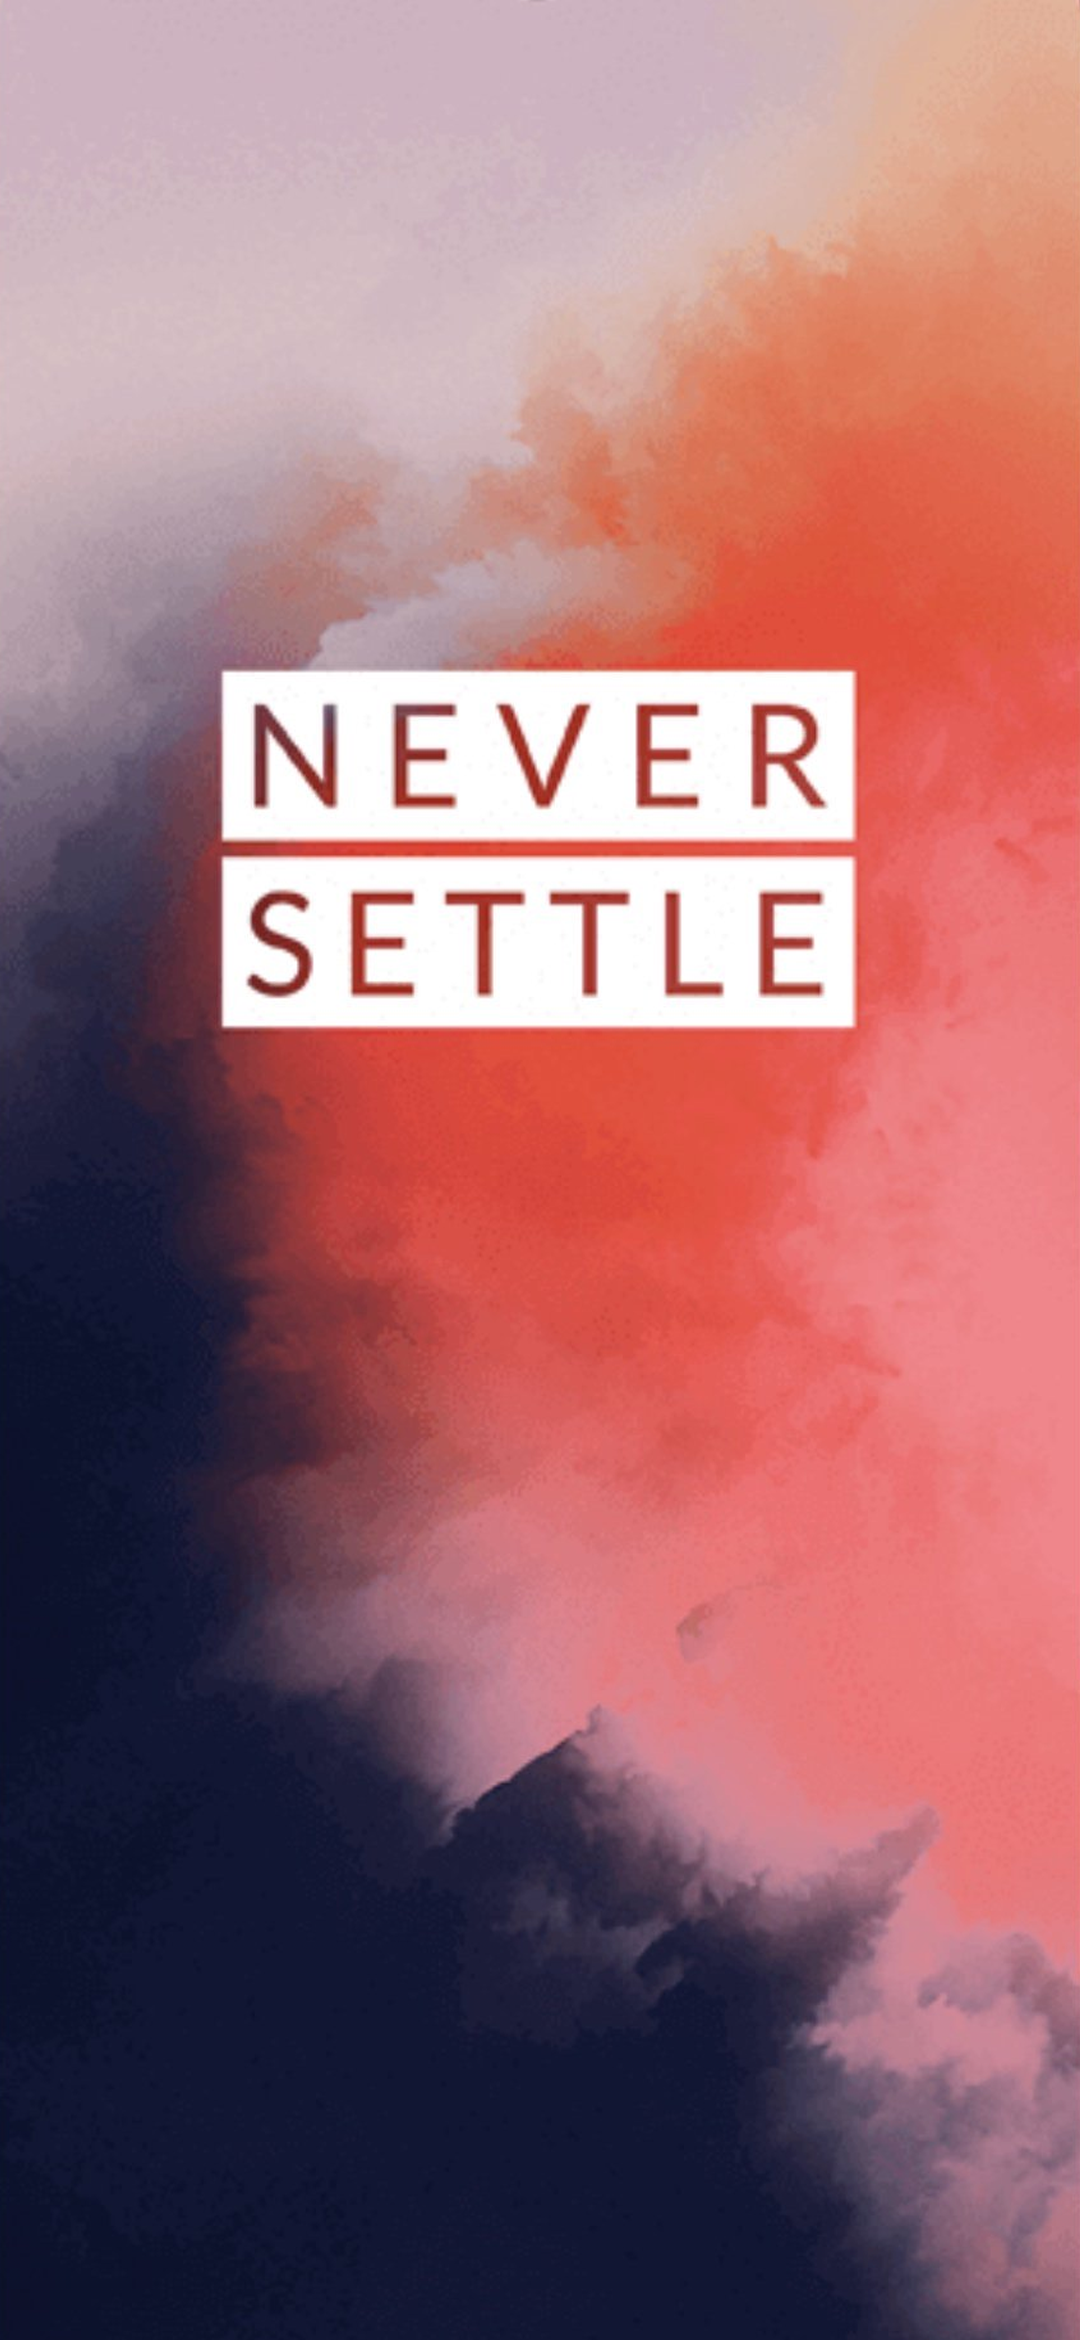 OnePlus 7T Wallpaper (YTECHB Exclusive). Never settle wallpaper, Oneplus wallpaper, Blue wallpaper iphone